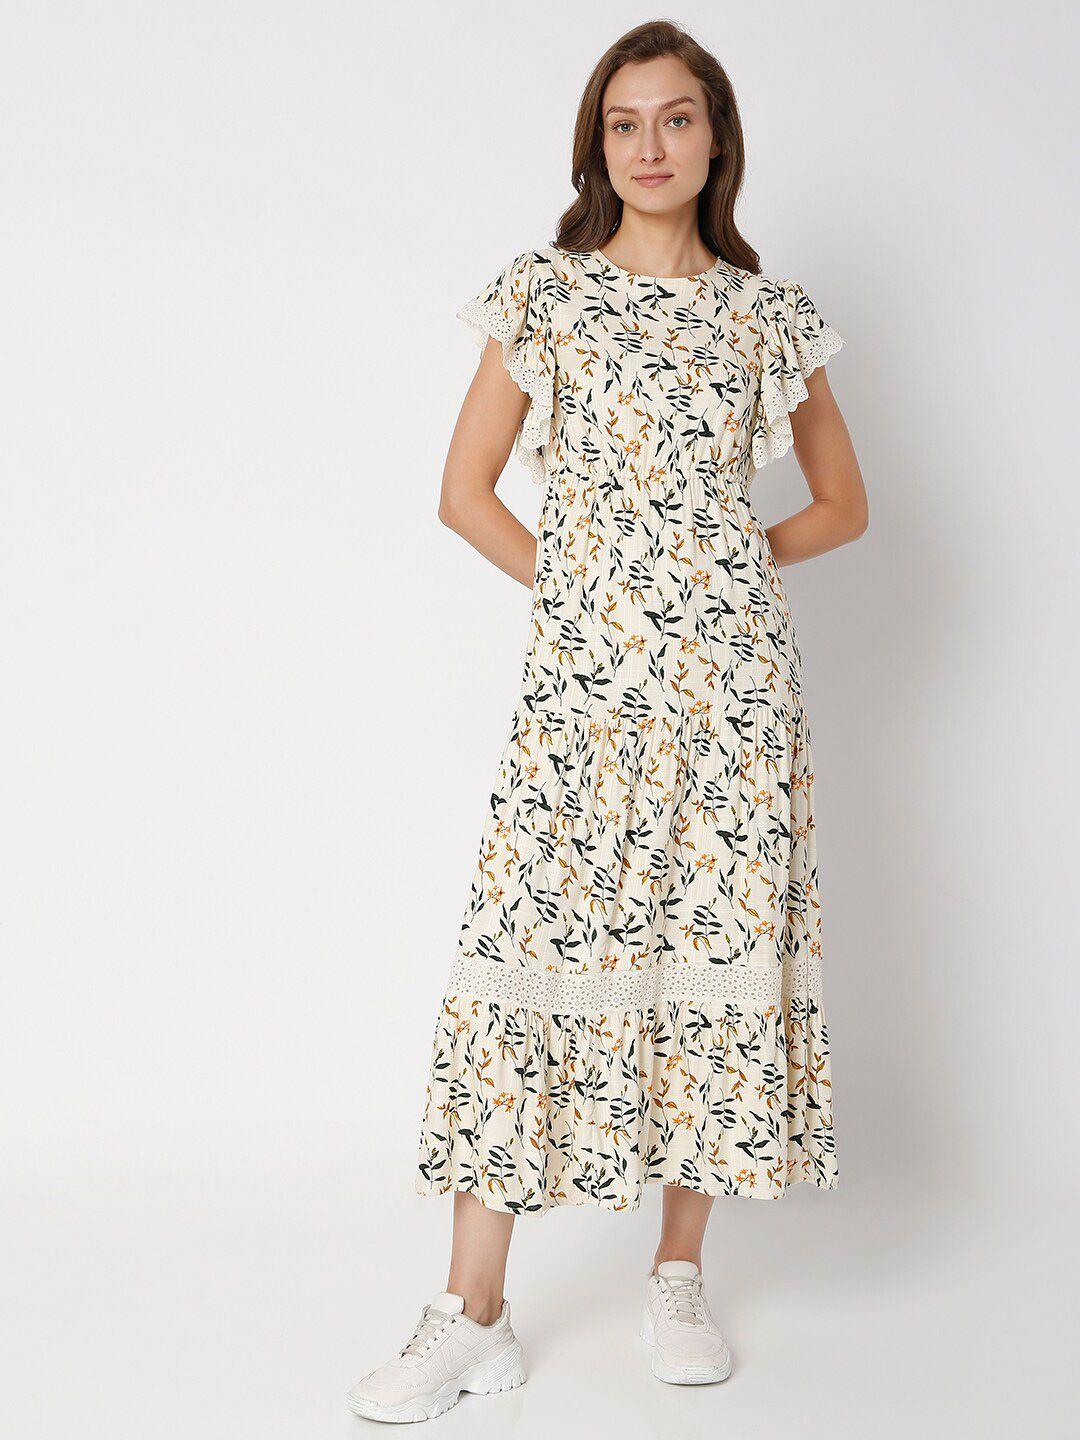 vero moda women off white & green floral printed fit & flare dress